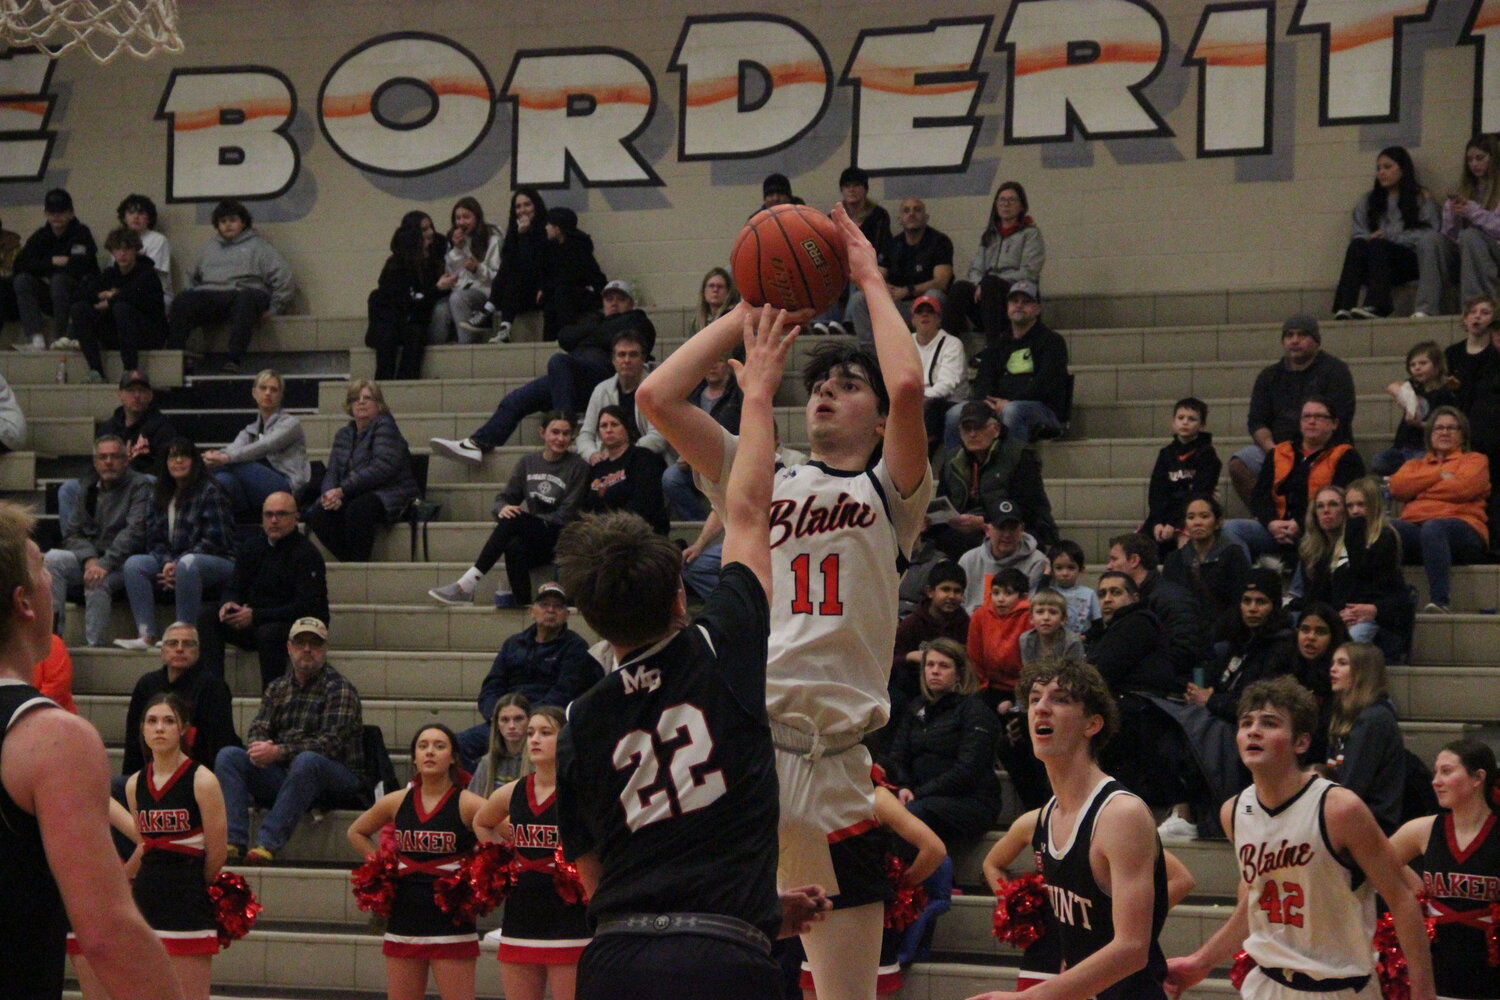 Junior guard Landon Melton pulls up for a jump shot during the second quarter of Blaine’s play-in game against Mount Baker on February 5. Blaine lost 65-54, ending its season at 4-17.